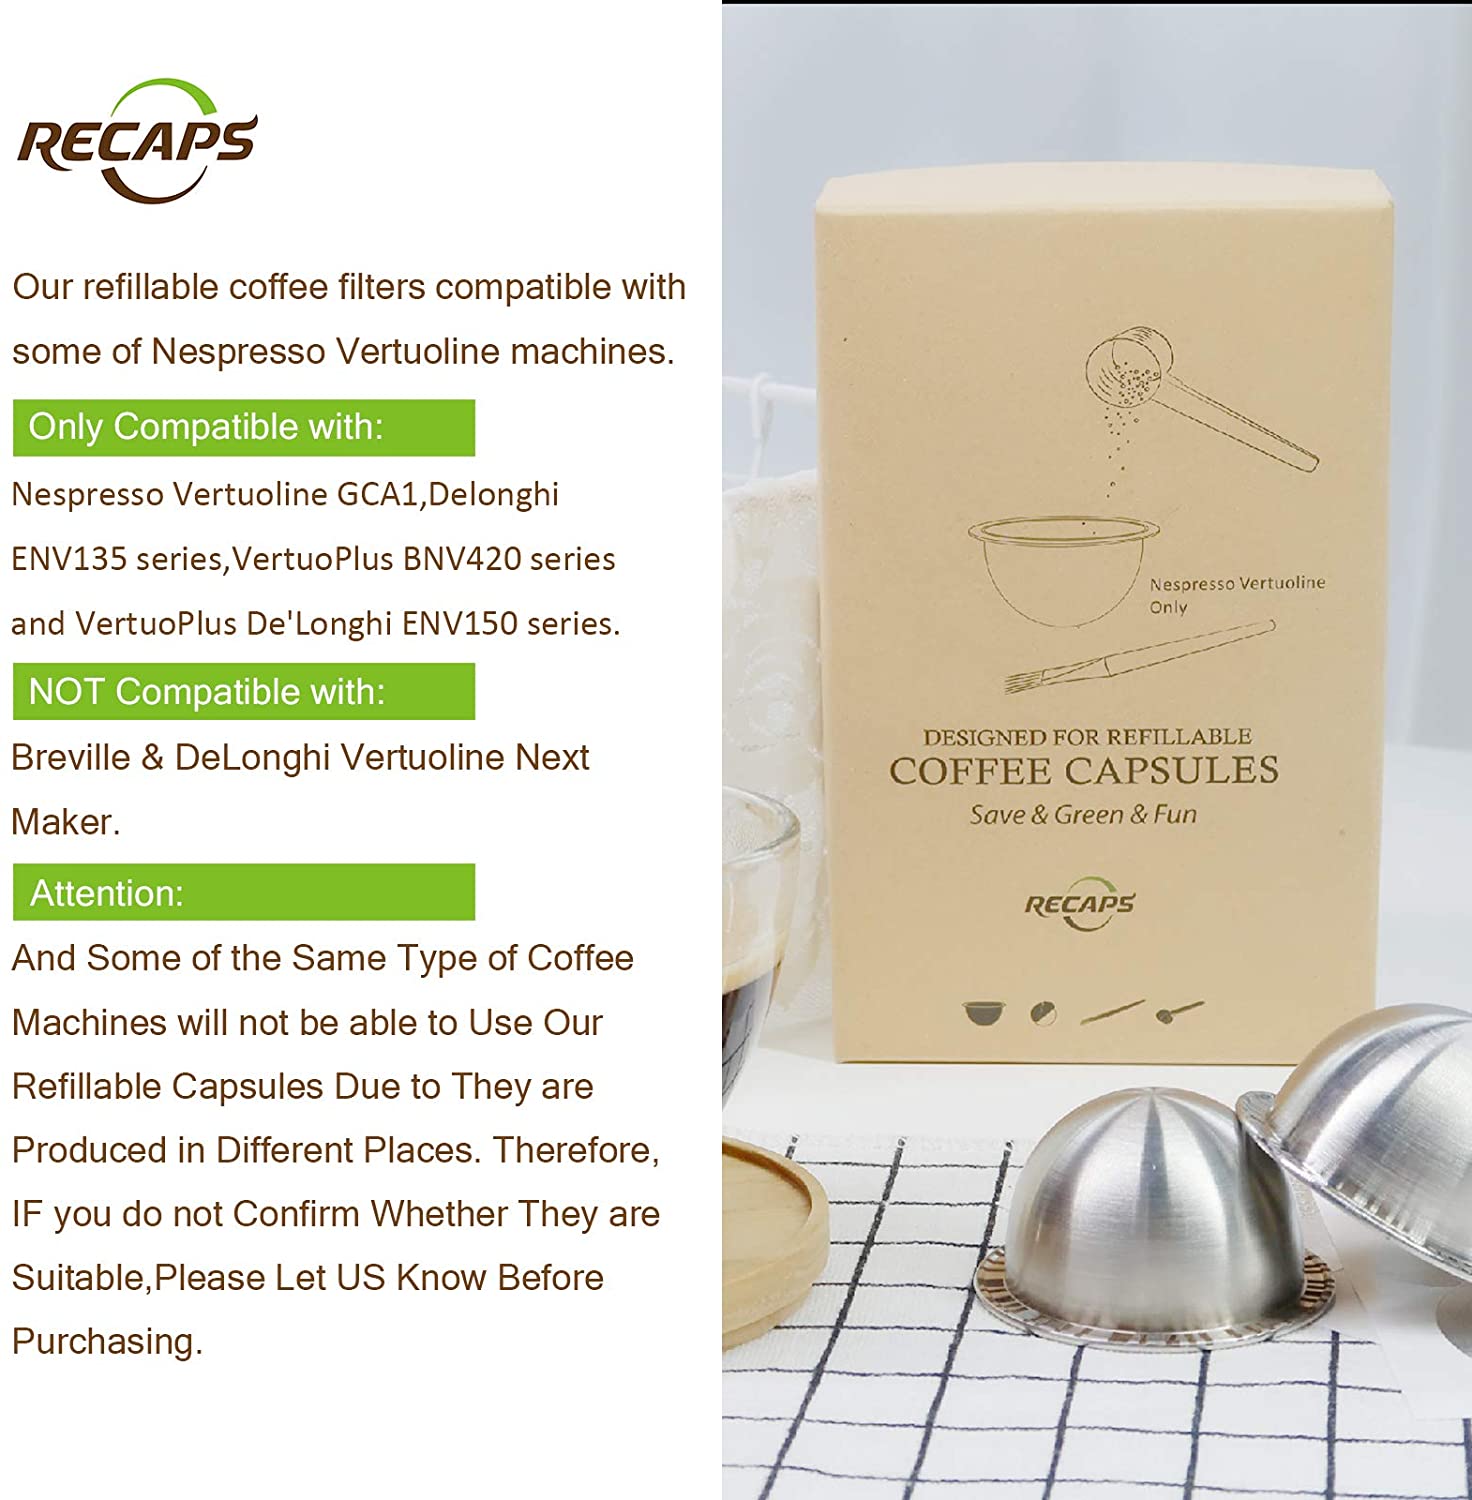 RECAPS Stainless Steel Refillable Capsules Reusable Filter Pods. - e4cents